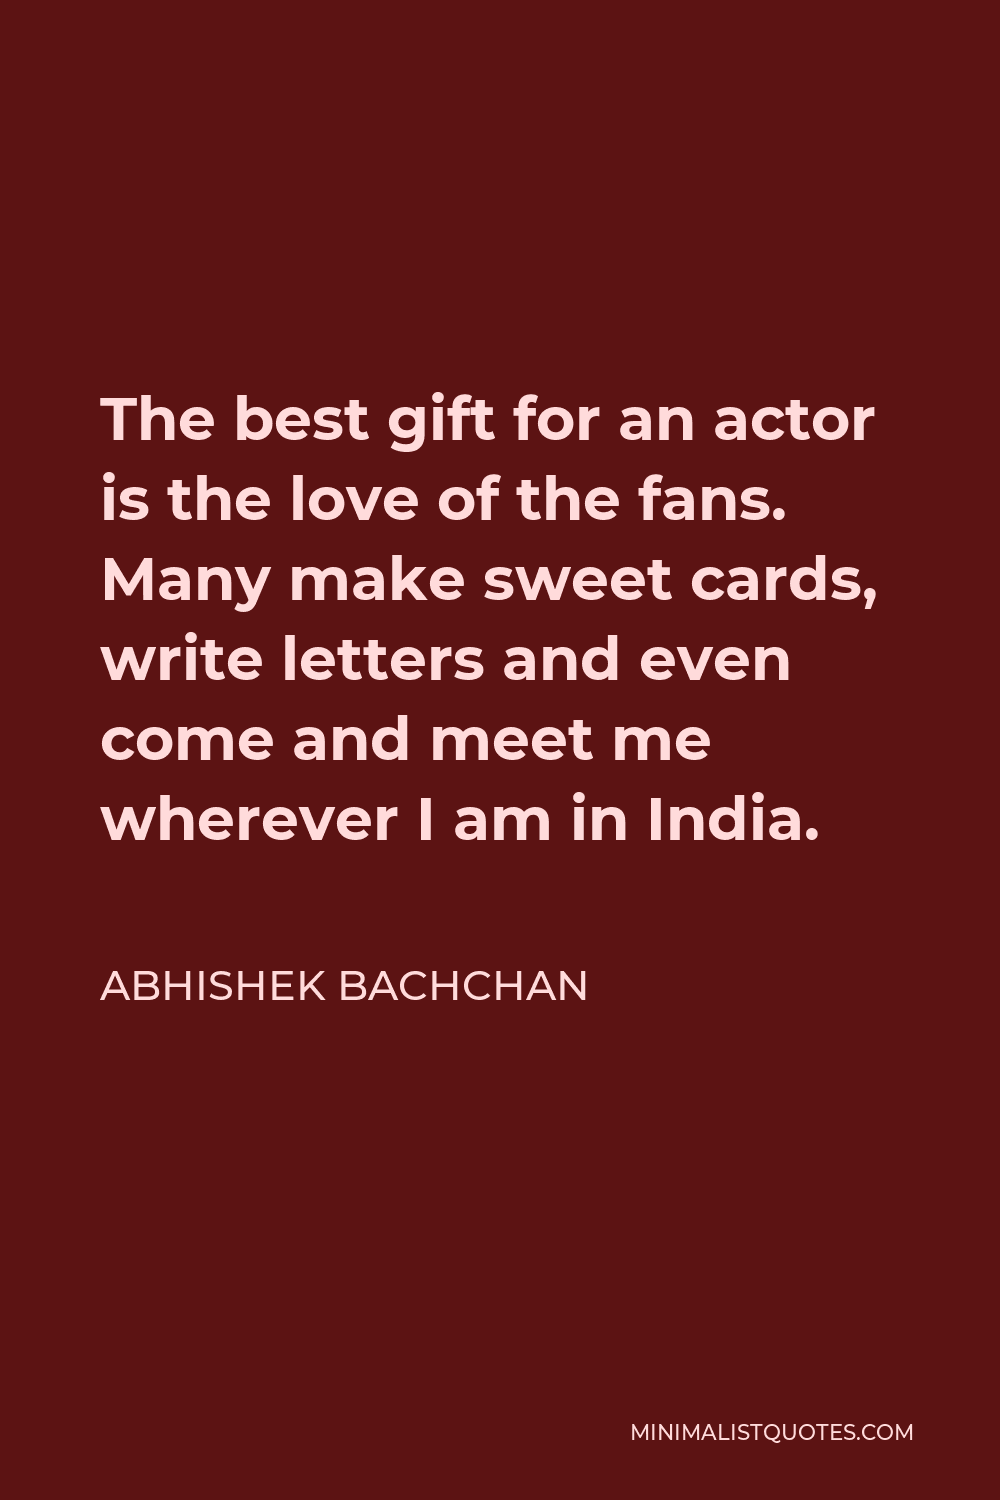 Abhishek Bachchan Quote - The best gift for an actor is the love of the fans. Many make sweet cards, write letters and even come and meet me wherever I am in India.